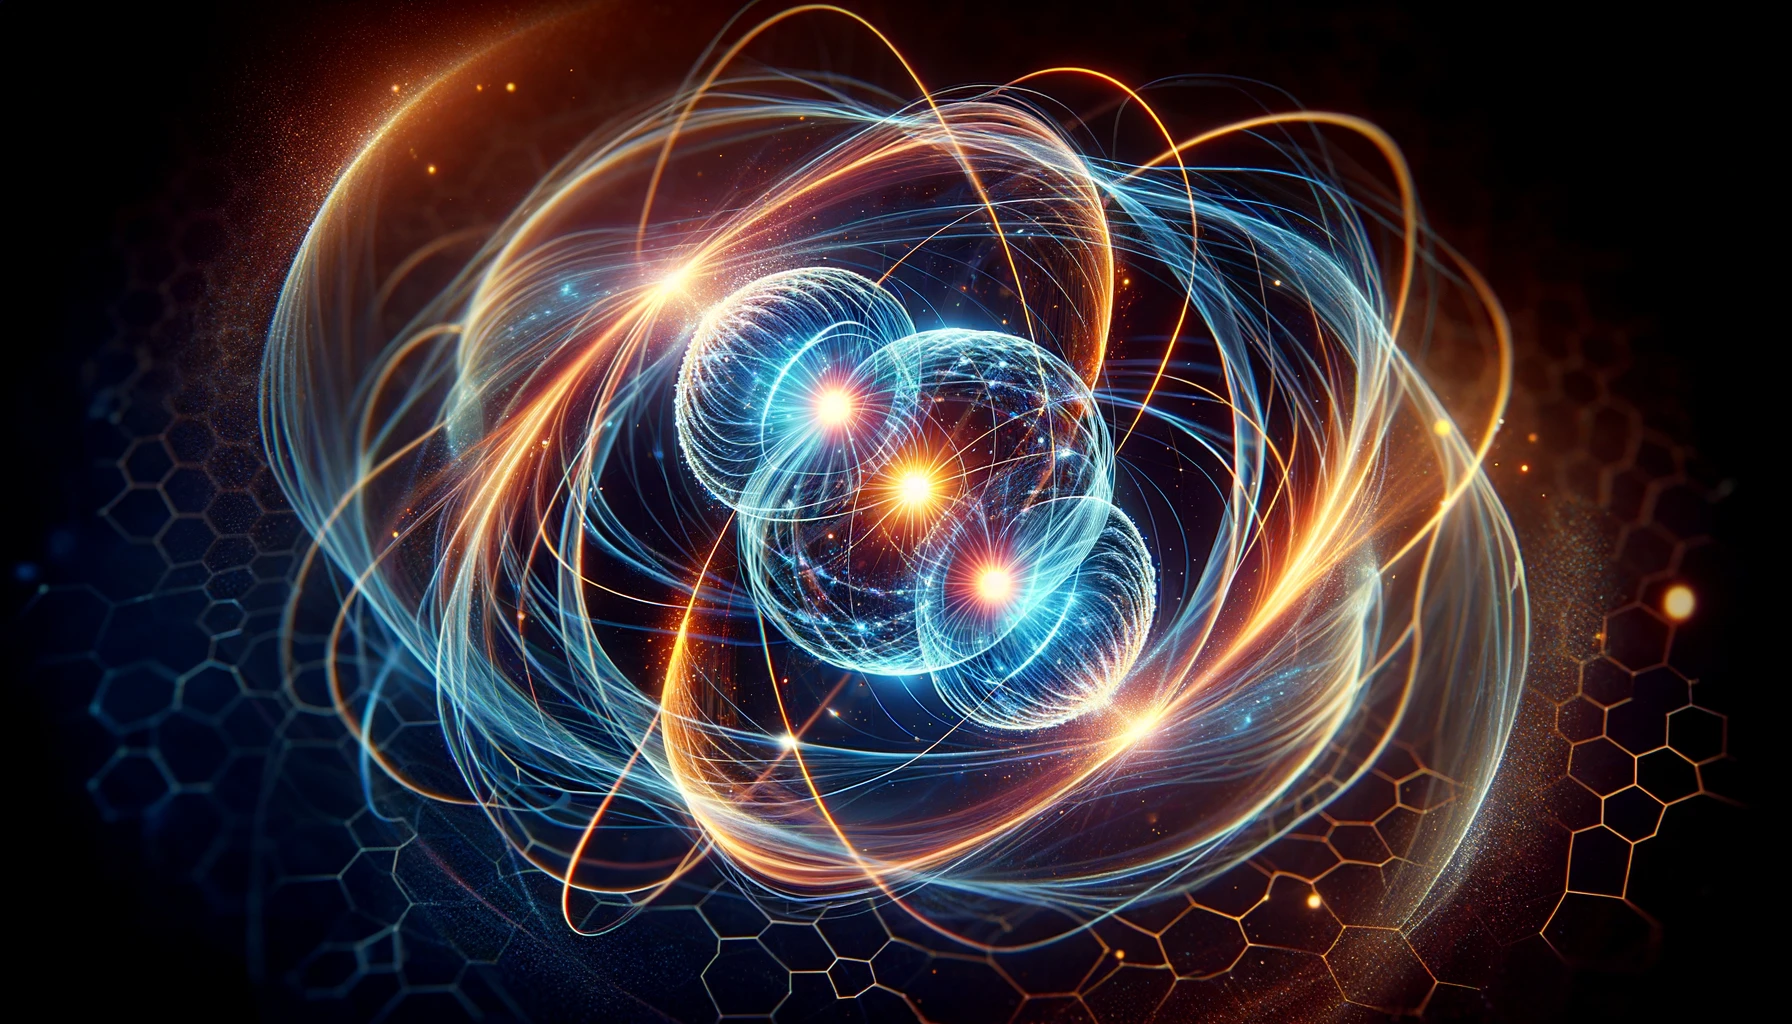 Dall·e 2024 03 09 12.58.41 Create An Abstract Image Featuring Two Luminous Energy Orbs Entwined With Glowing Rings, Resembling A Scientific Illustration Of Quantum Entanglement